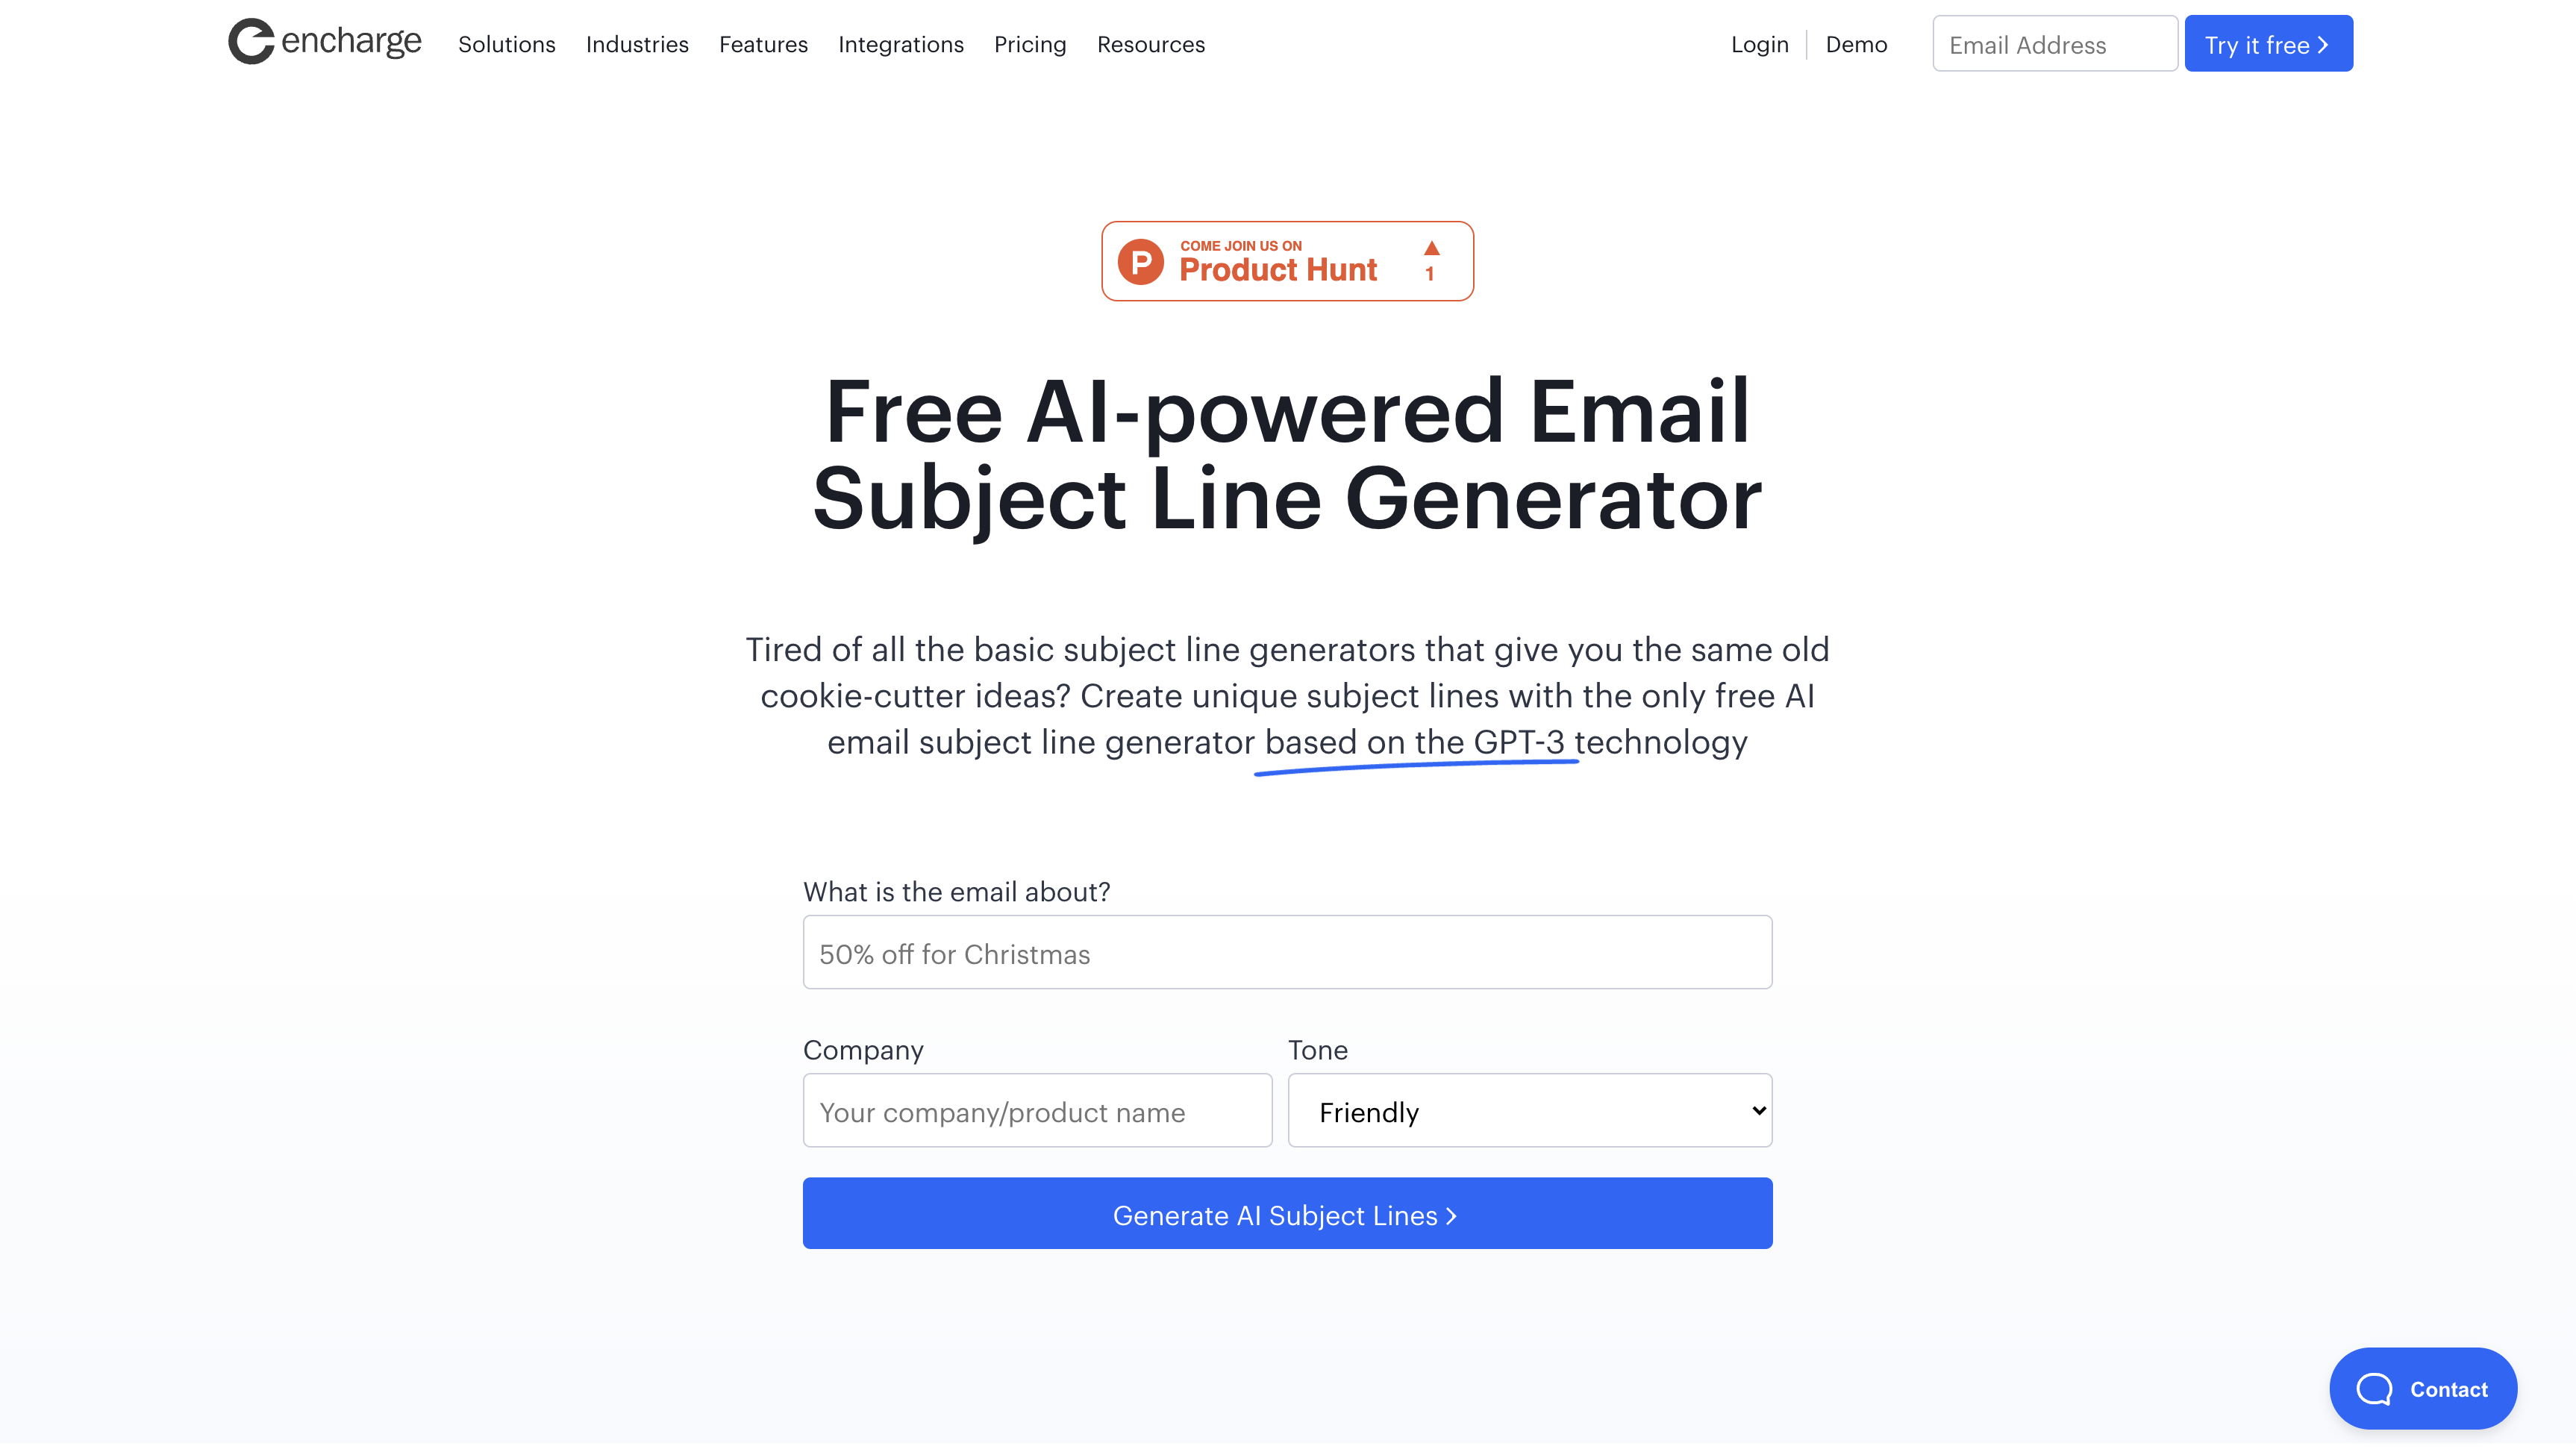 Free AI Email Subject Line Generator by Encharge - скріншот 2